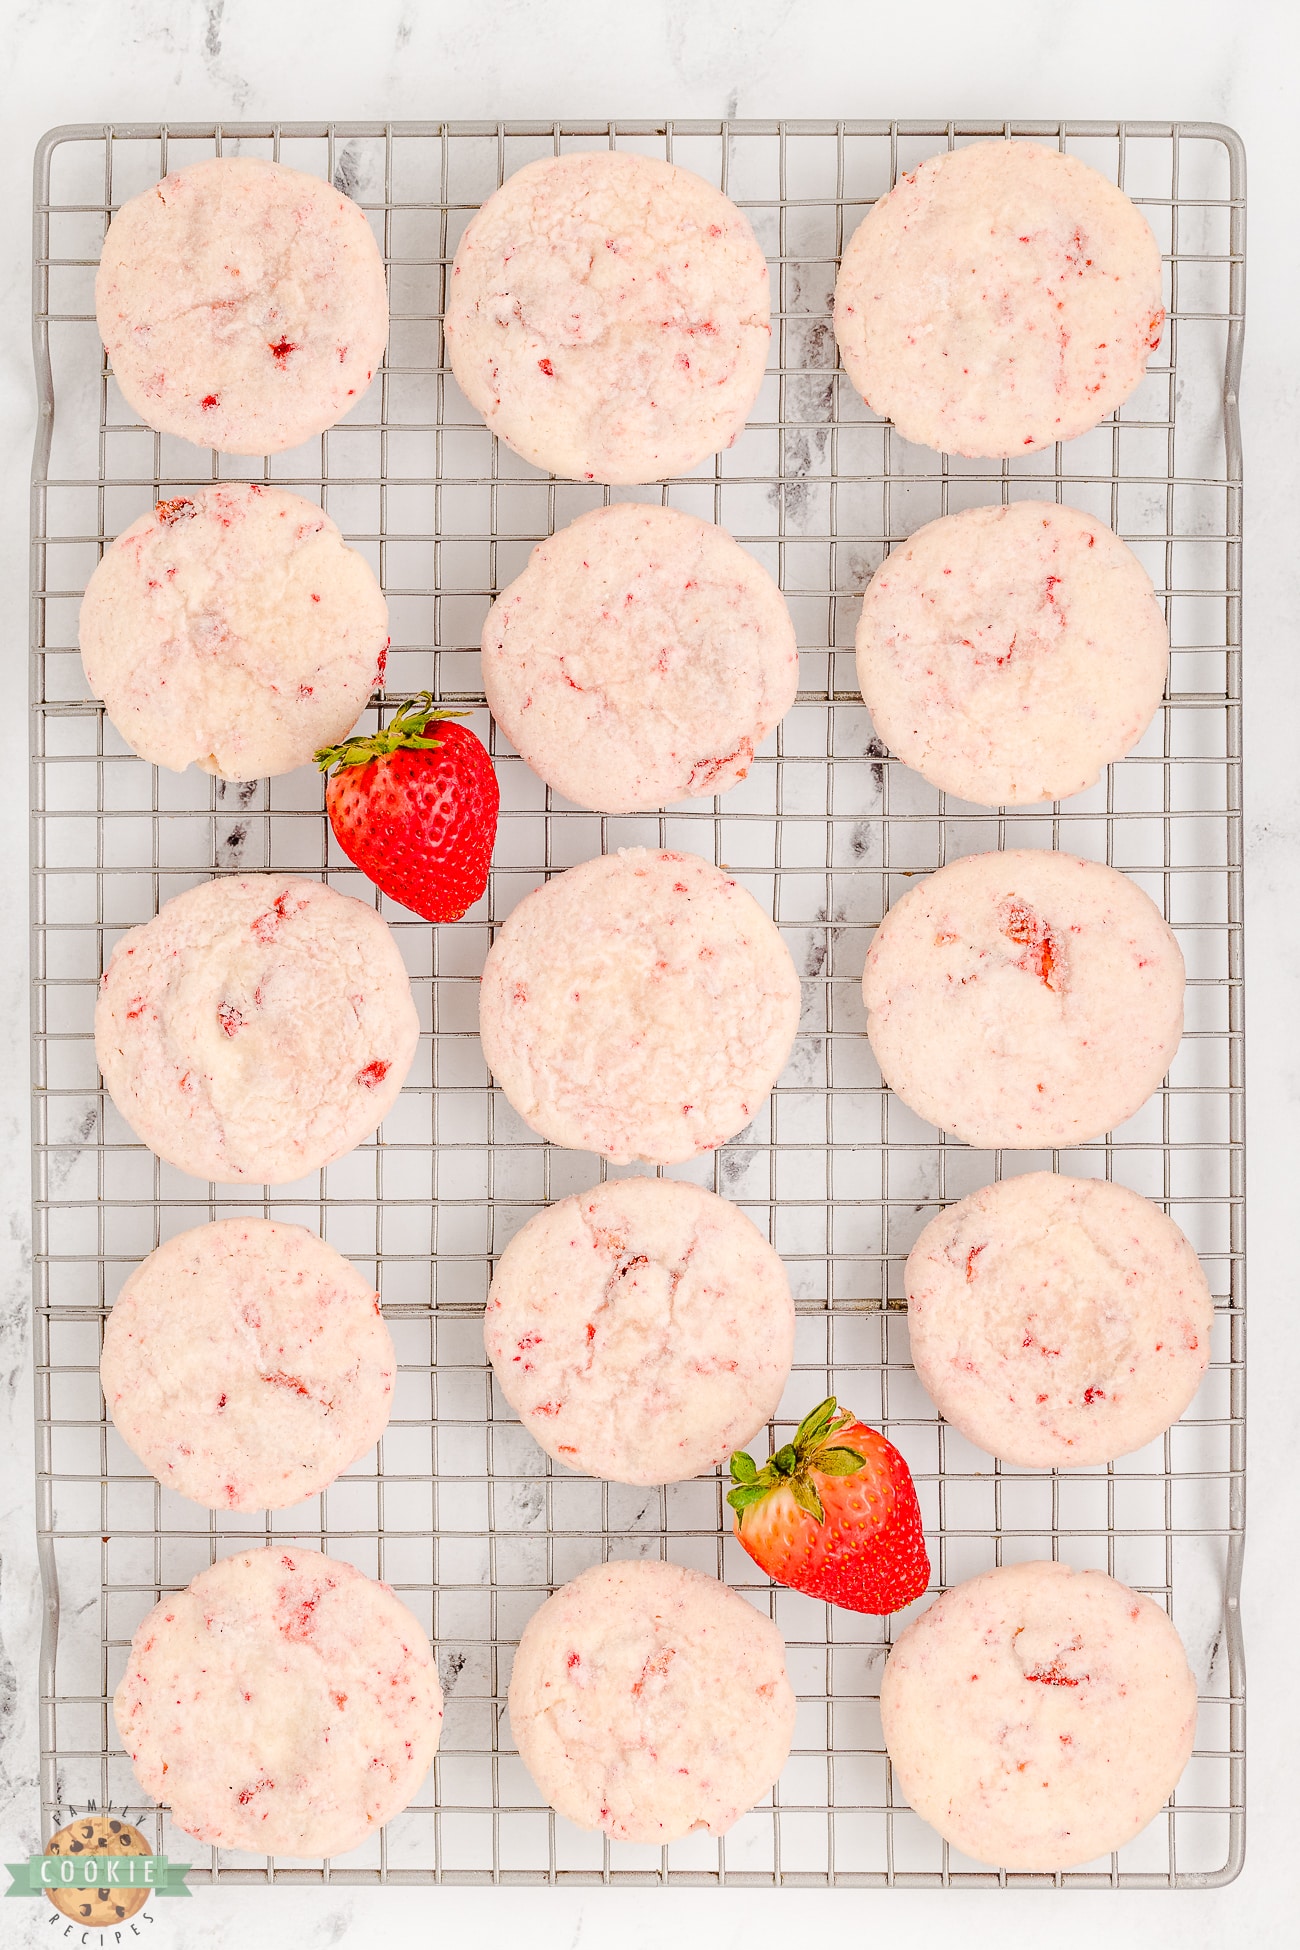 sugar cookies made with strawberry cream cheese on a cooling rack